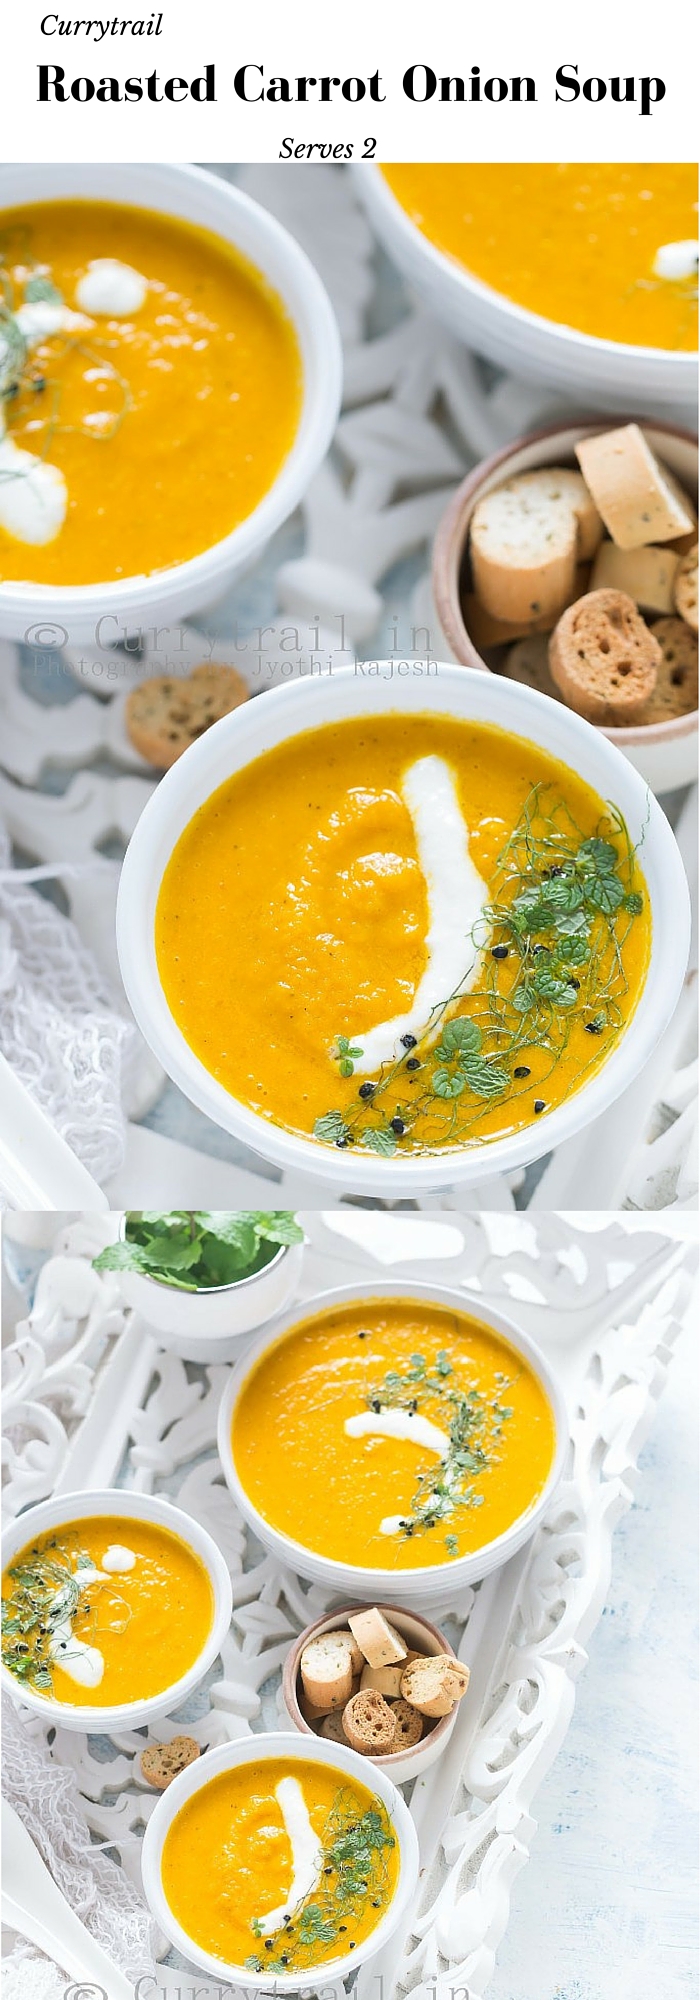 Roasted carrot onion soup